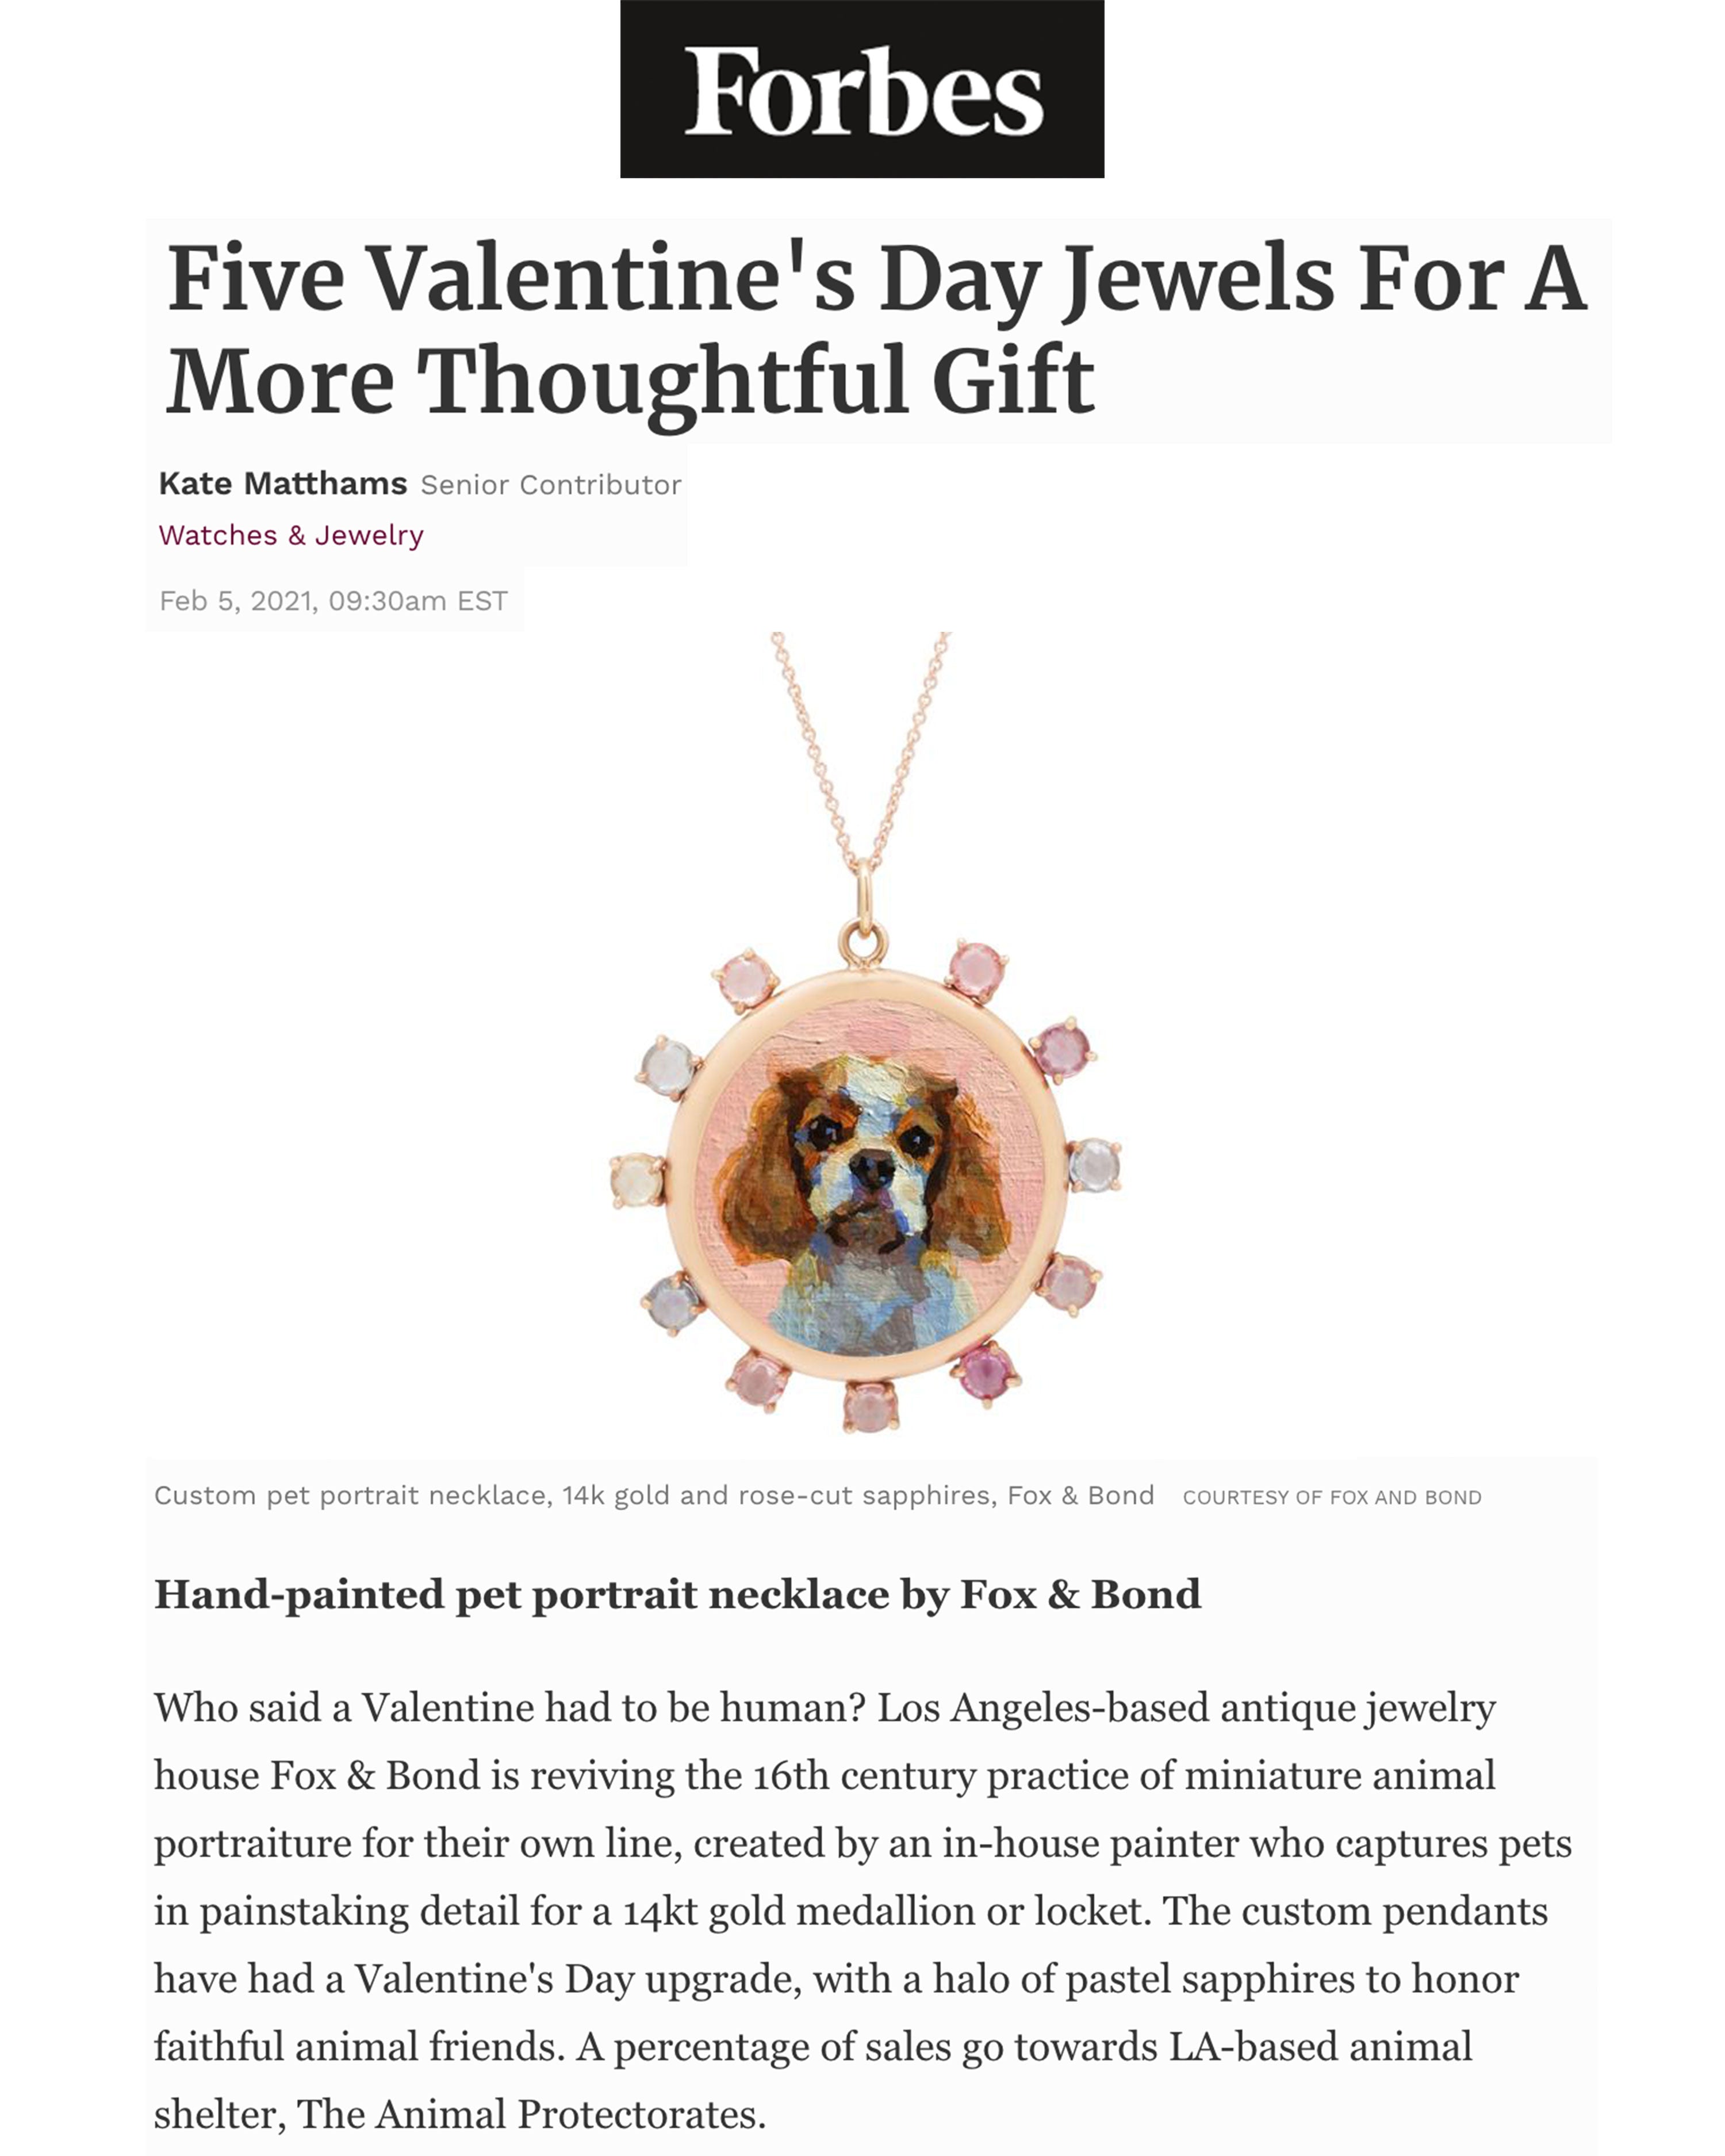 Forbes: Five Valentine's Day Jewels For A More Thoughtful Gift